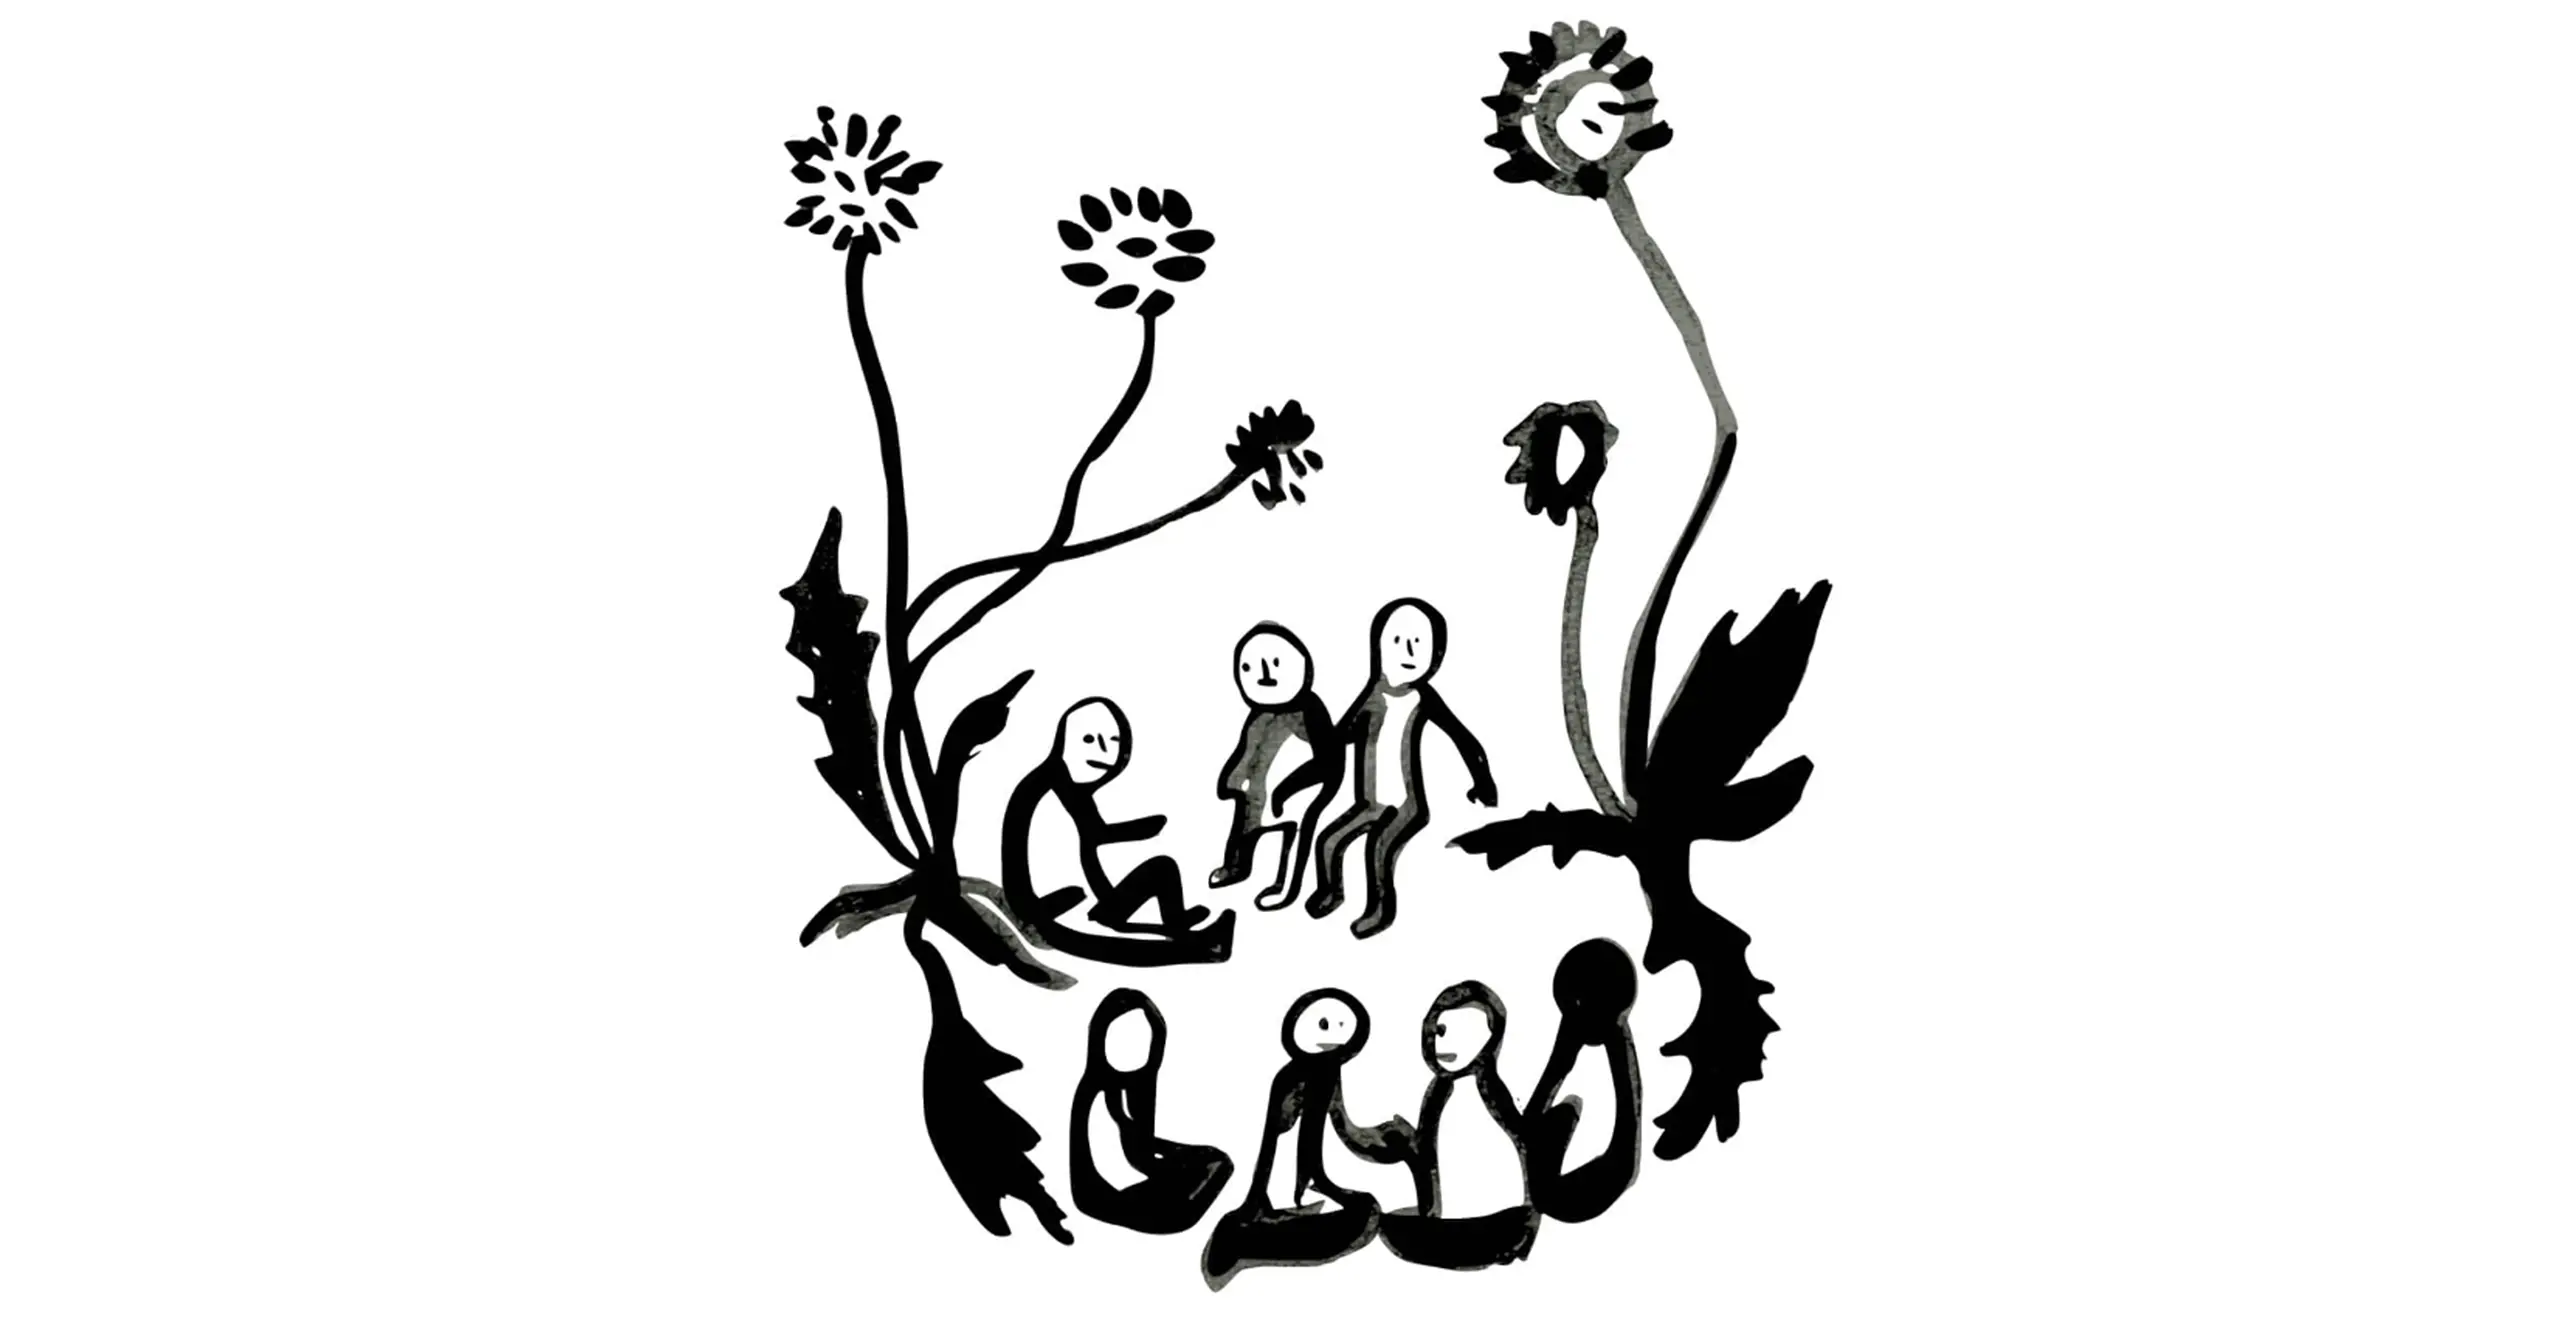 A simple ink drawing of seven people sitting in a circle under large flowers